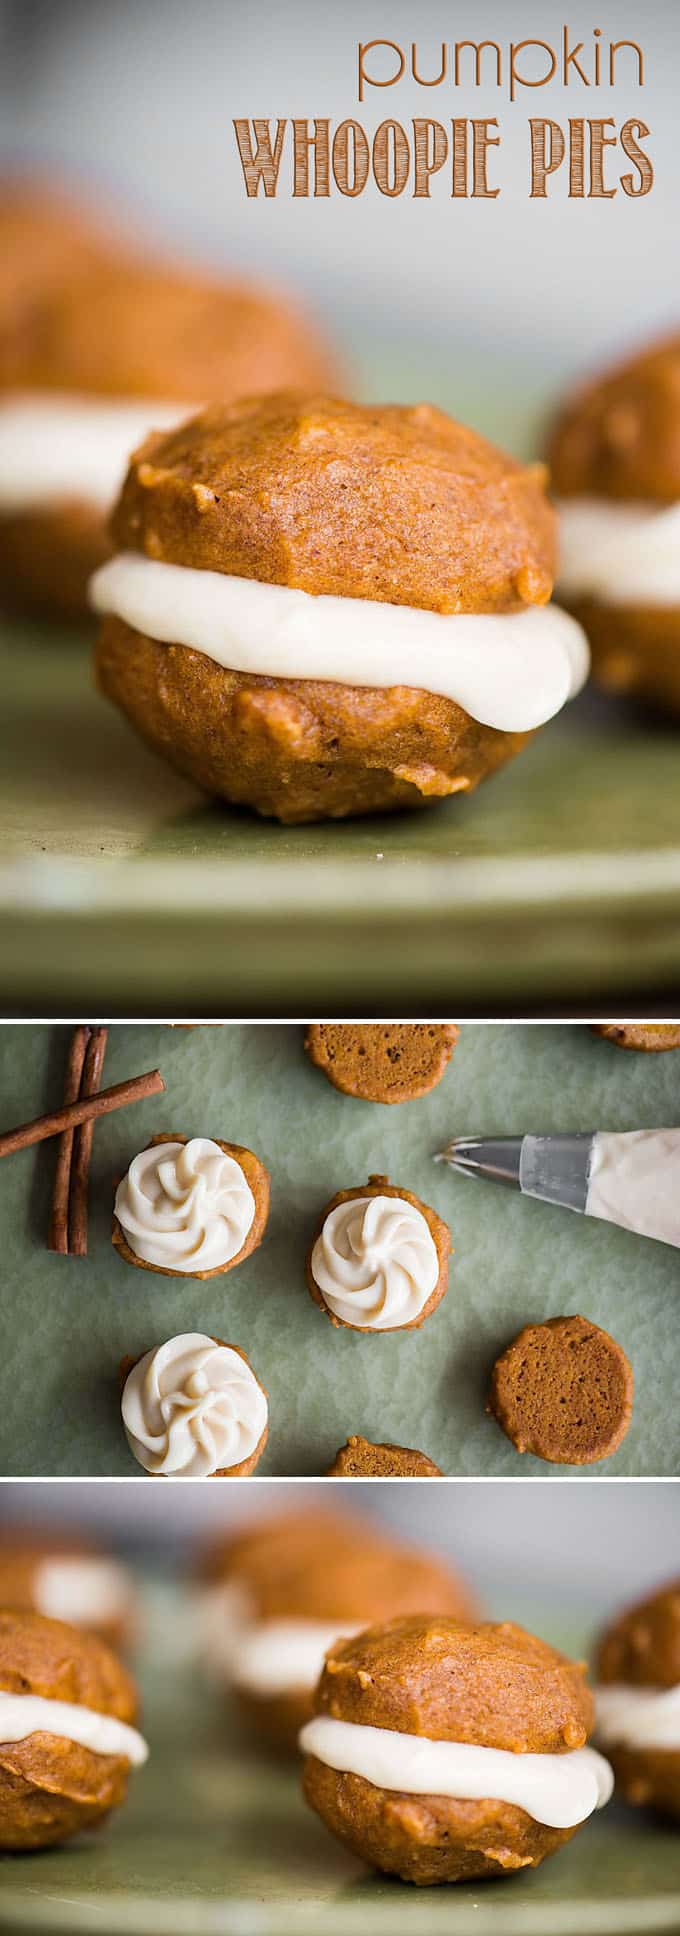 Pumpkin Whoopie Pies, made with super soft homemade pumpkin cookies and maple cream cheese filling, are the perfect fall two-bite dessert!